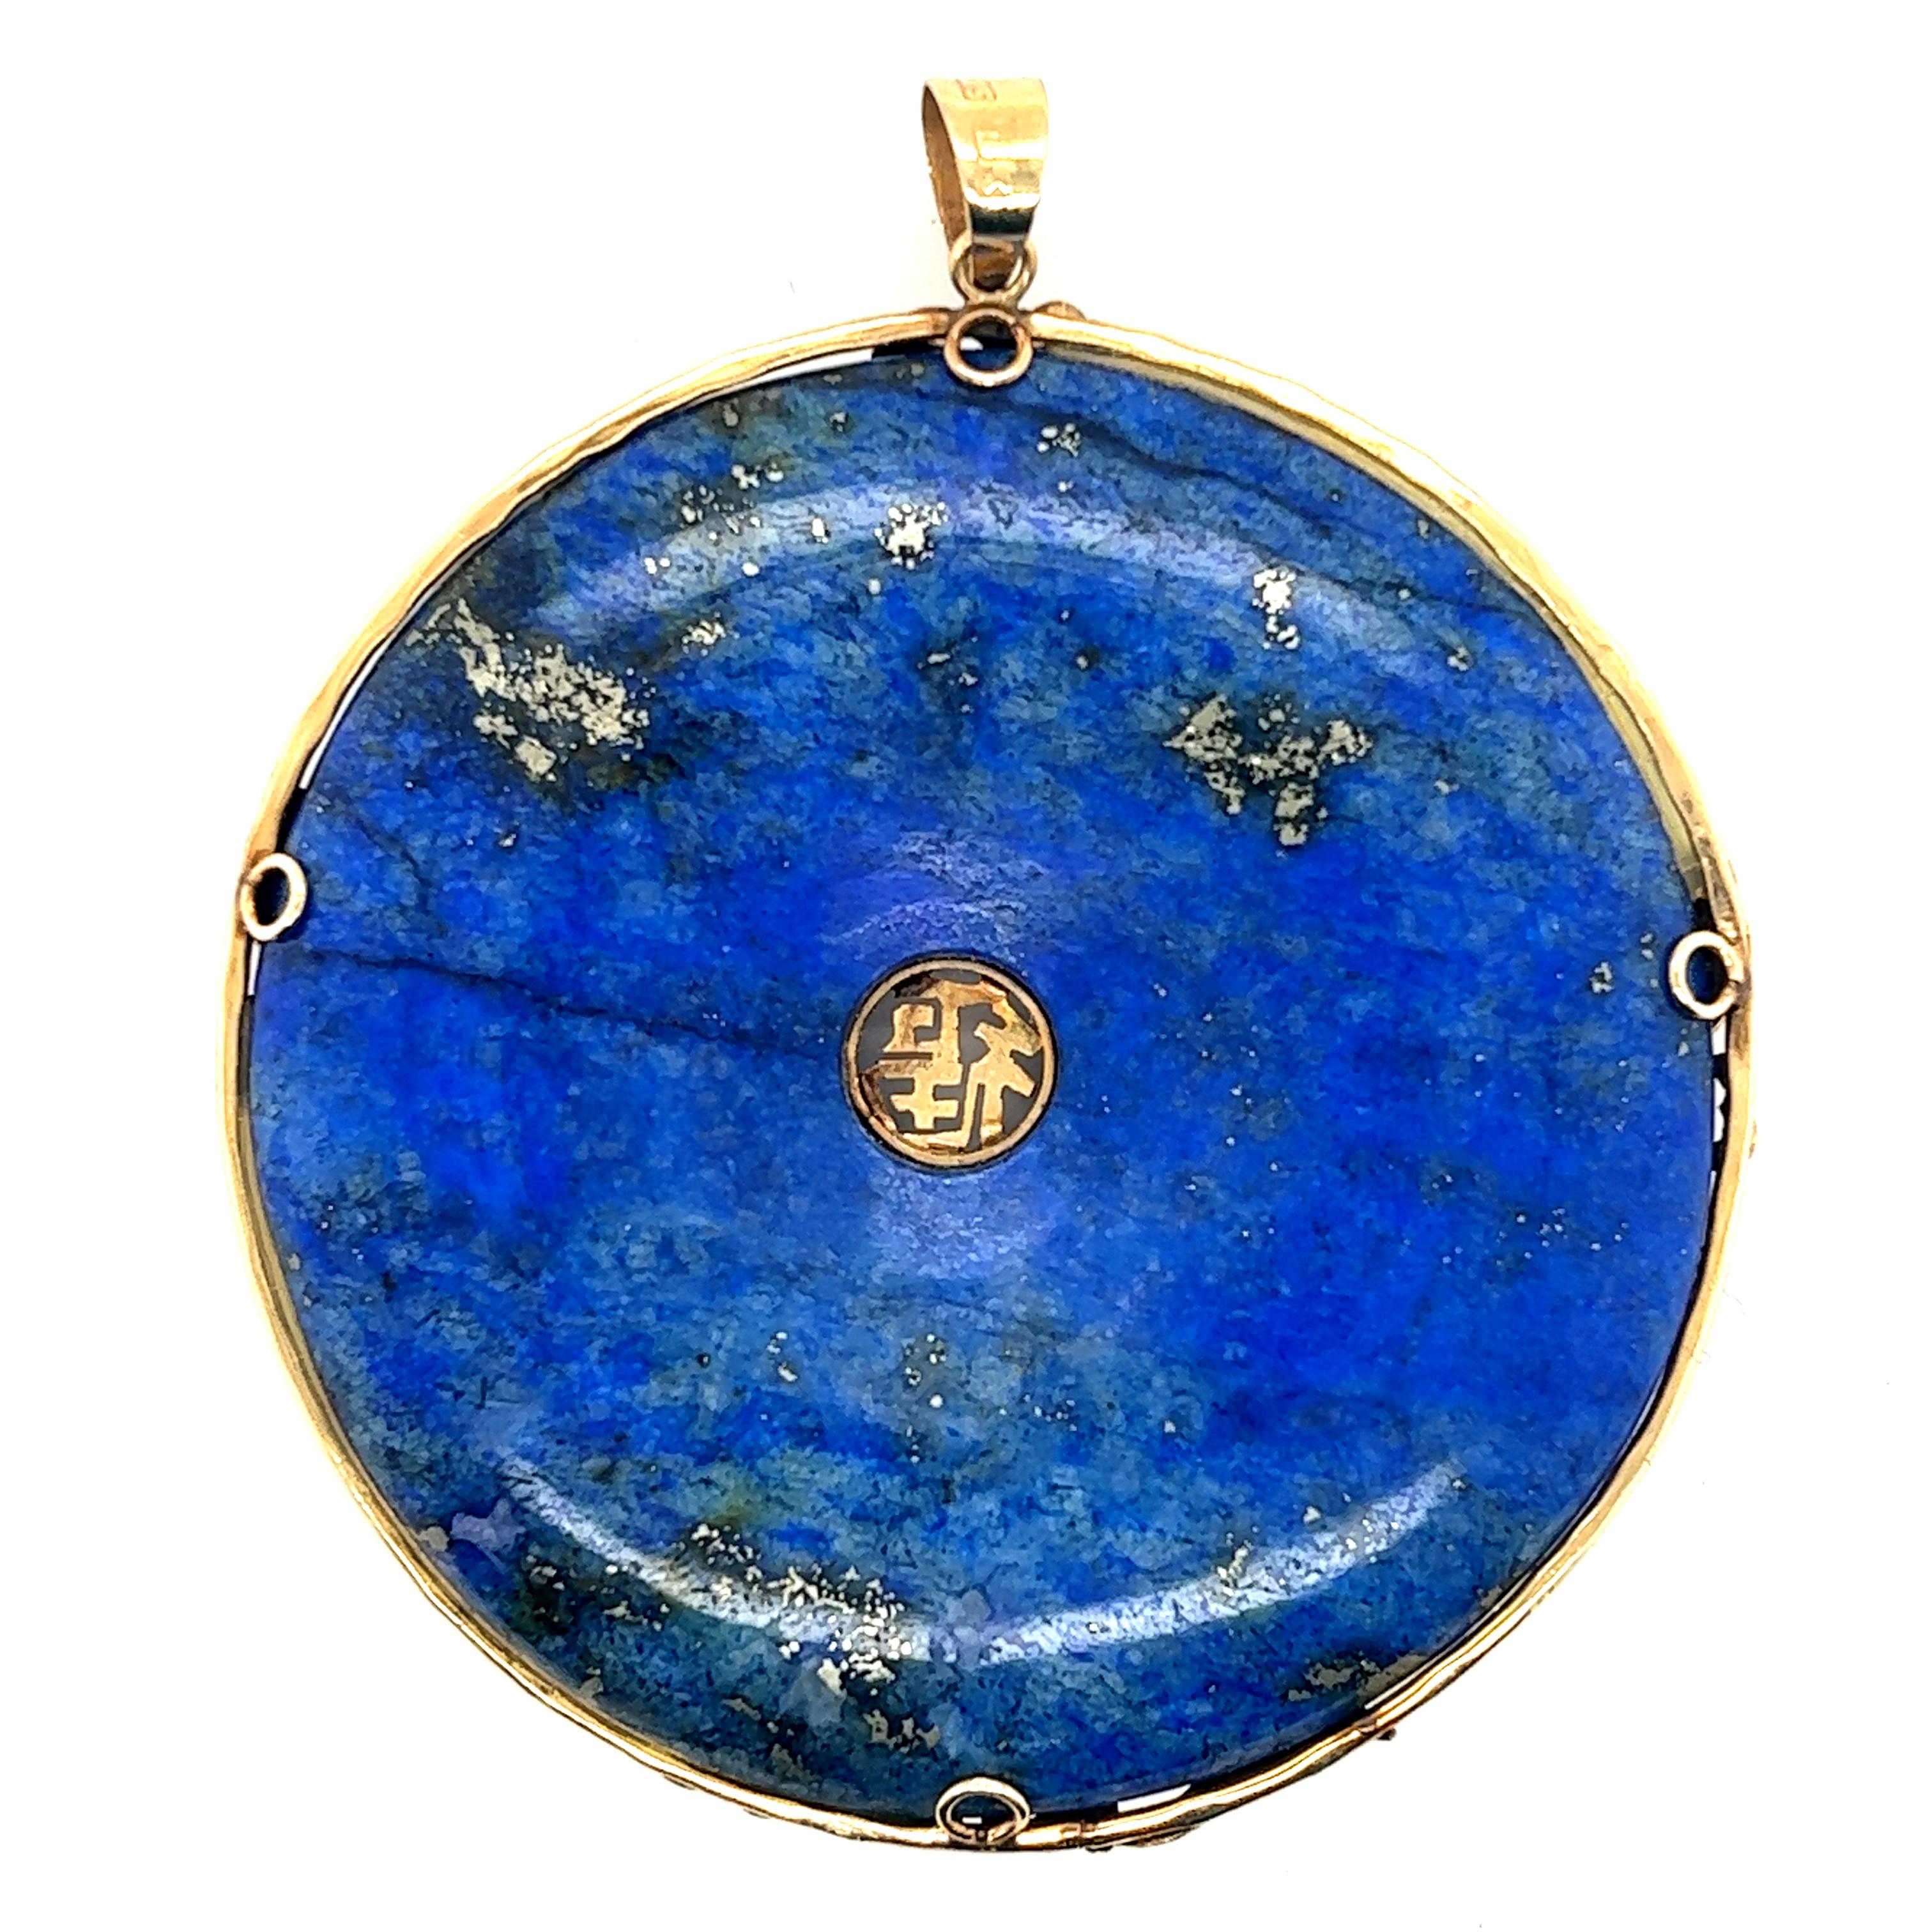 Fabulous pendant crafted in 14k yellow gold encasing one large donut shaped Lapis Lazuli gemstone. The pendant is finely encased in luscious 14k yellow gold with butterfly patterns highlighting the edges.  The butterfly's seem to float amongst the